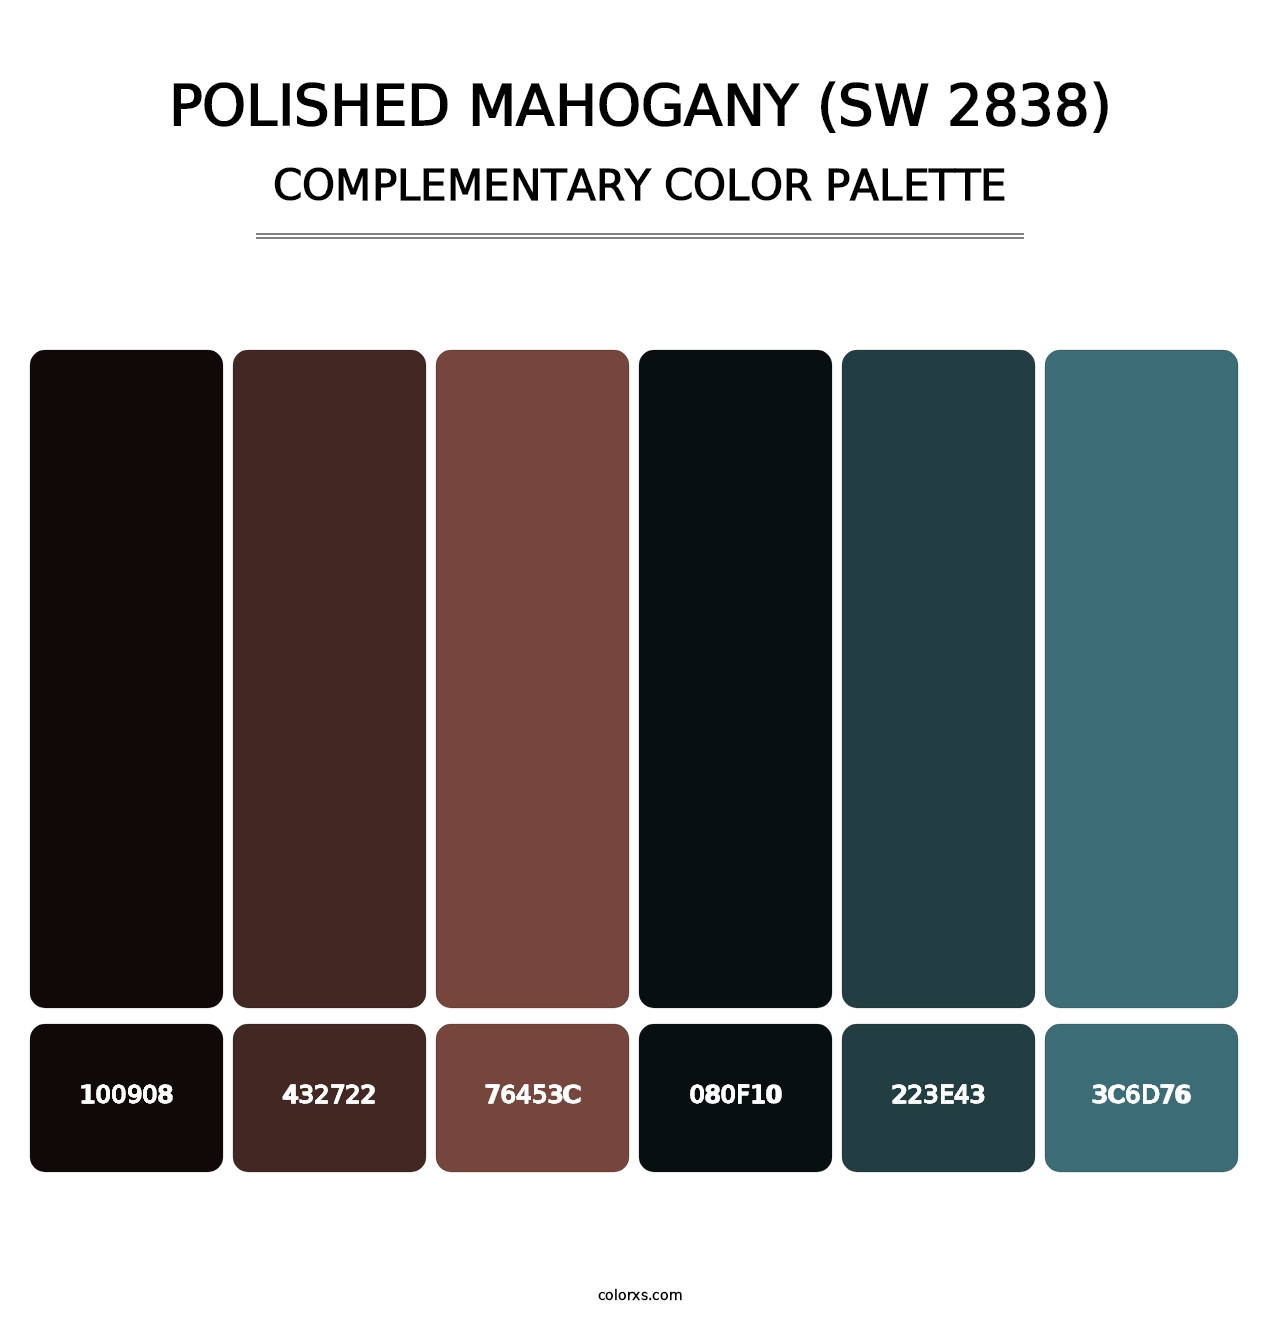 Polished Mahogany (SW 2838) - Complementary Color Palette